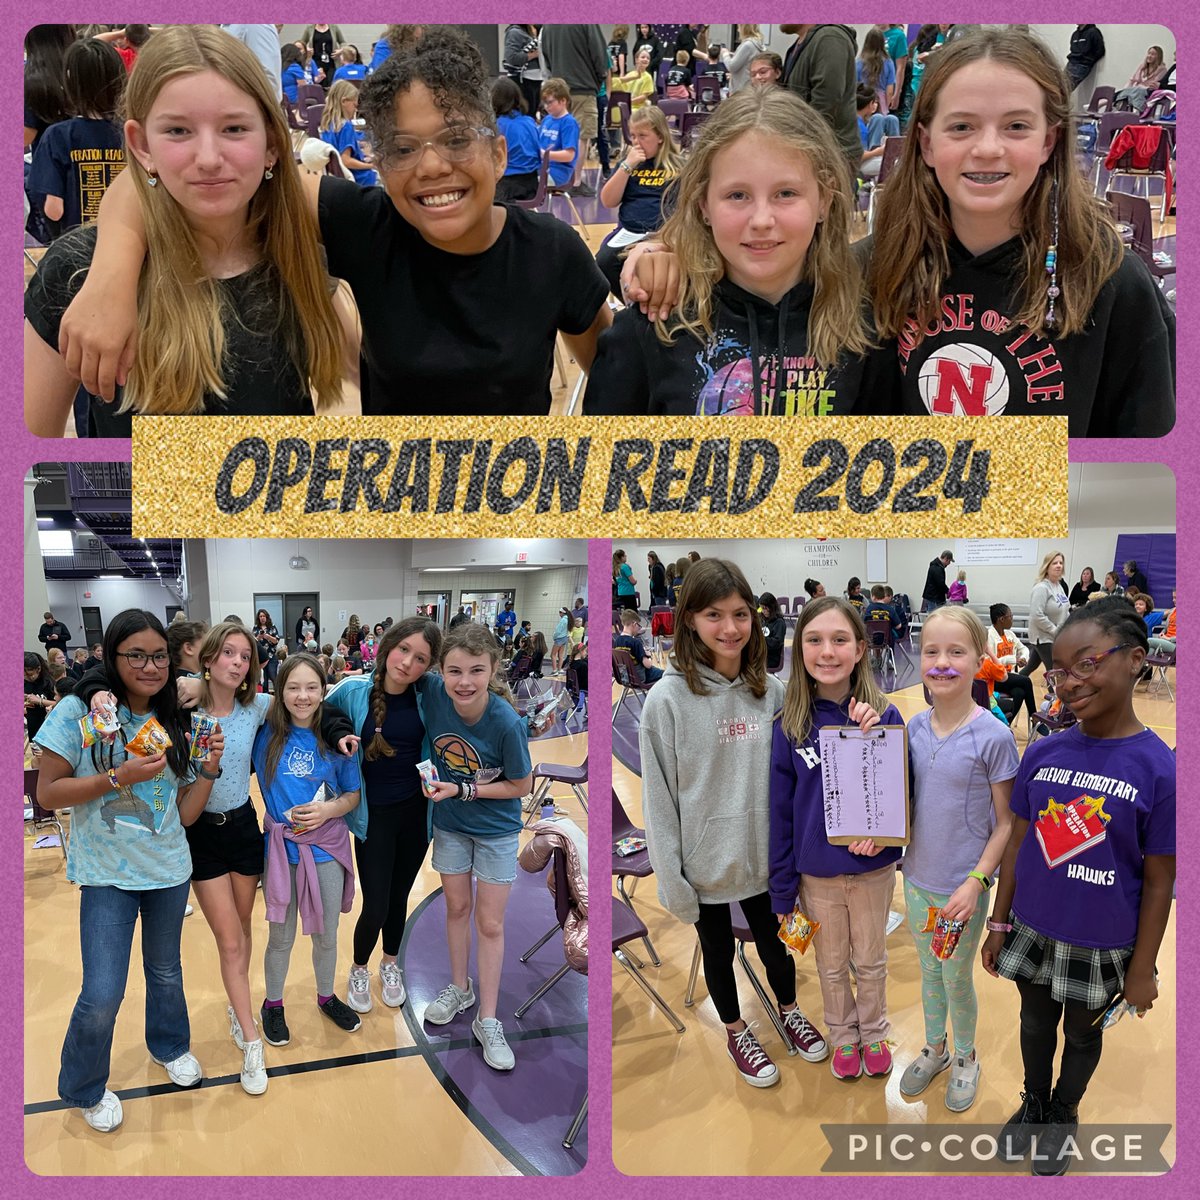 We are so proud of our Operation Read teams for working hard and competing today! Growing readers @BVHawksBPS @BellevueSchools #HawkPride